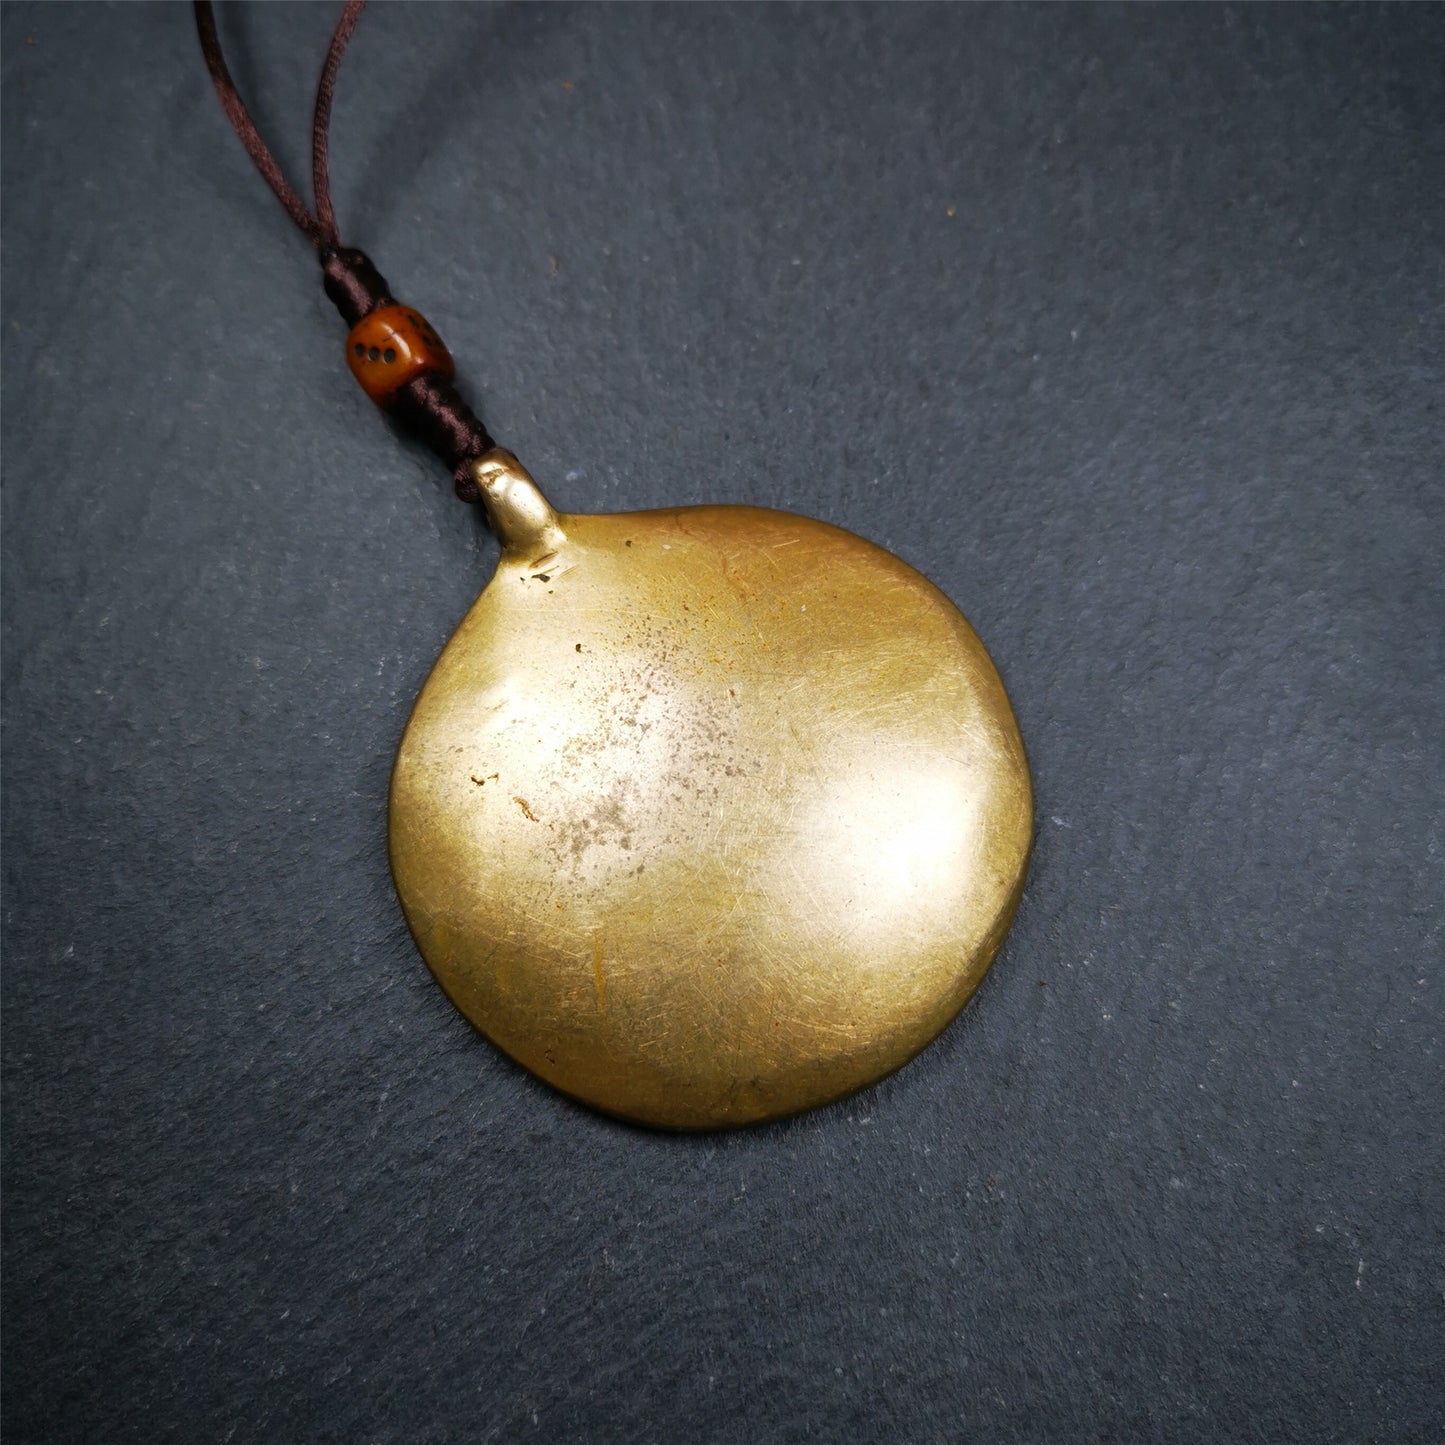 This unique tibetan melong badge was handmade by Tibetan Artist from Baiyu County. It's a Astrology Protective Amulet Pendant,made of brass,the front pattern is Tibetan Budhist Protective Amulet Pendant - SIPAHO(srid pa ho),a bone carved dice bead in the middle of the lanyard.